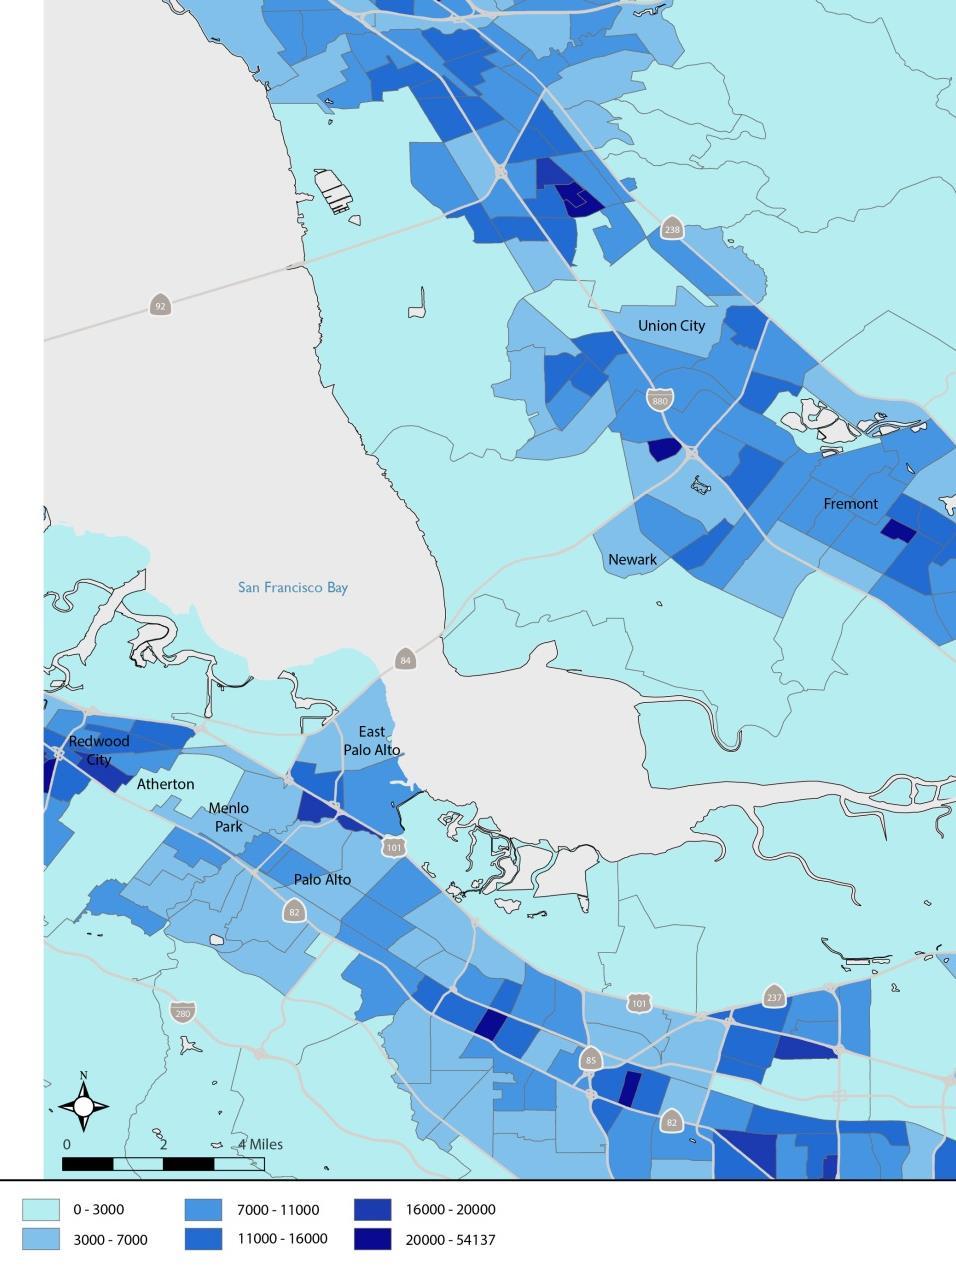 Population Higher density in East Palo Alto, Redwood City, Union City Peninsula study area to